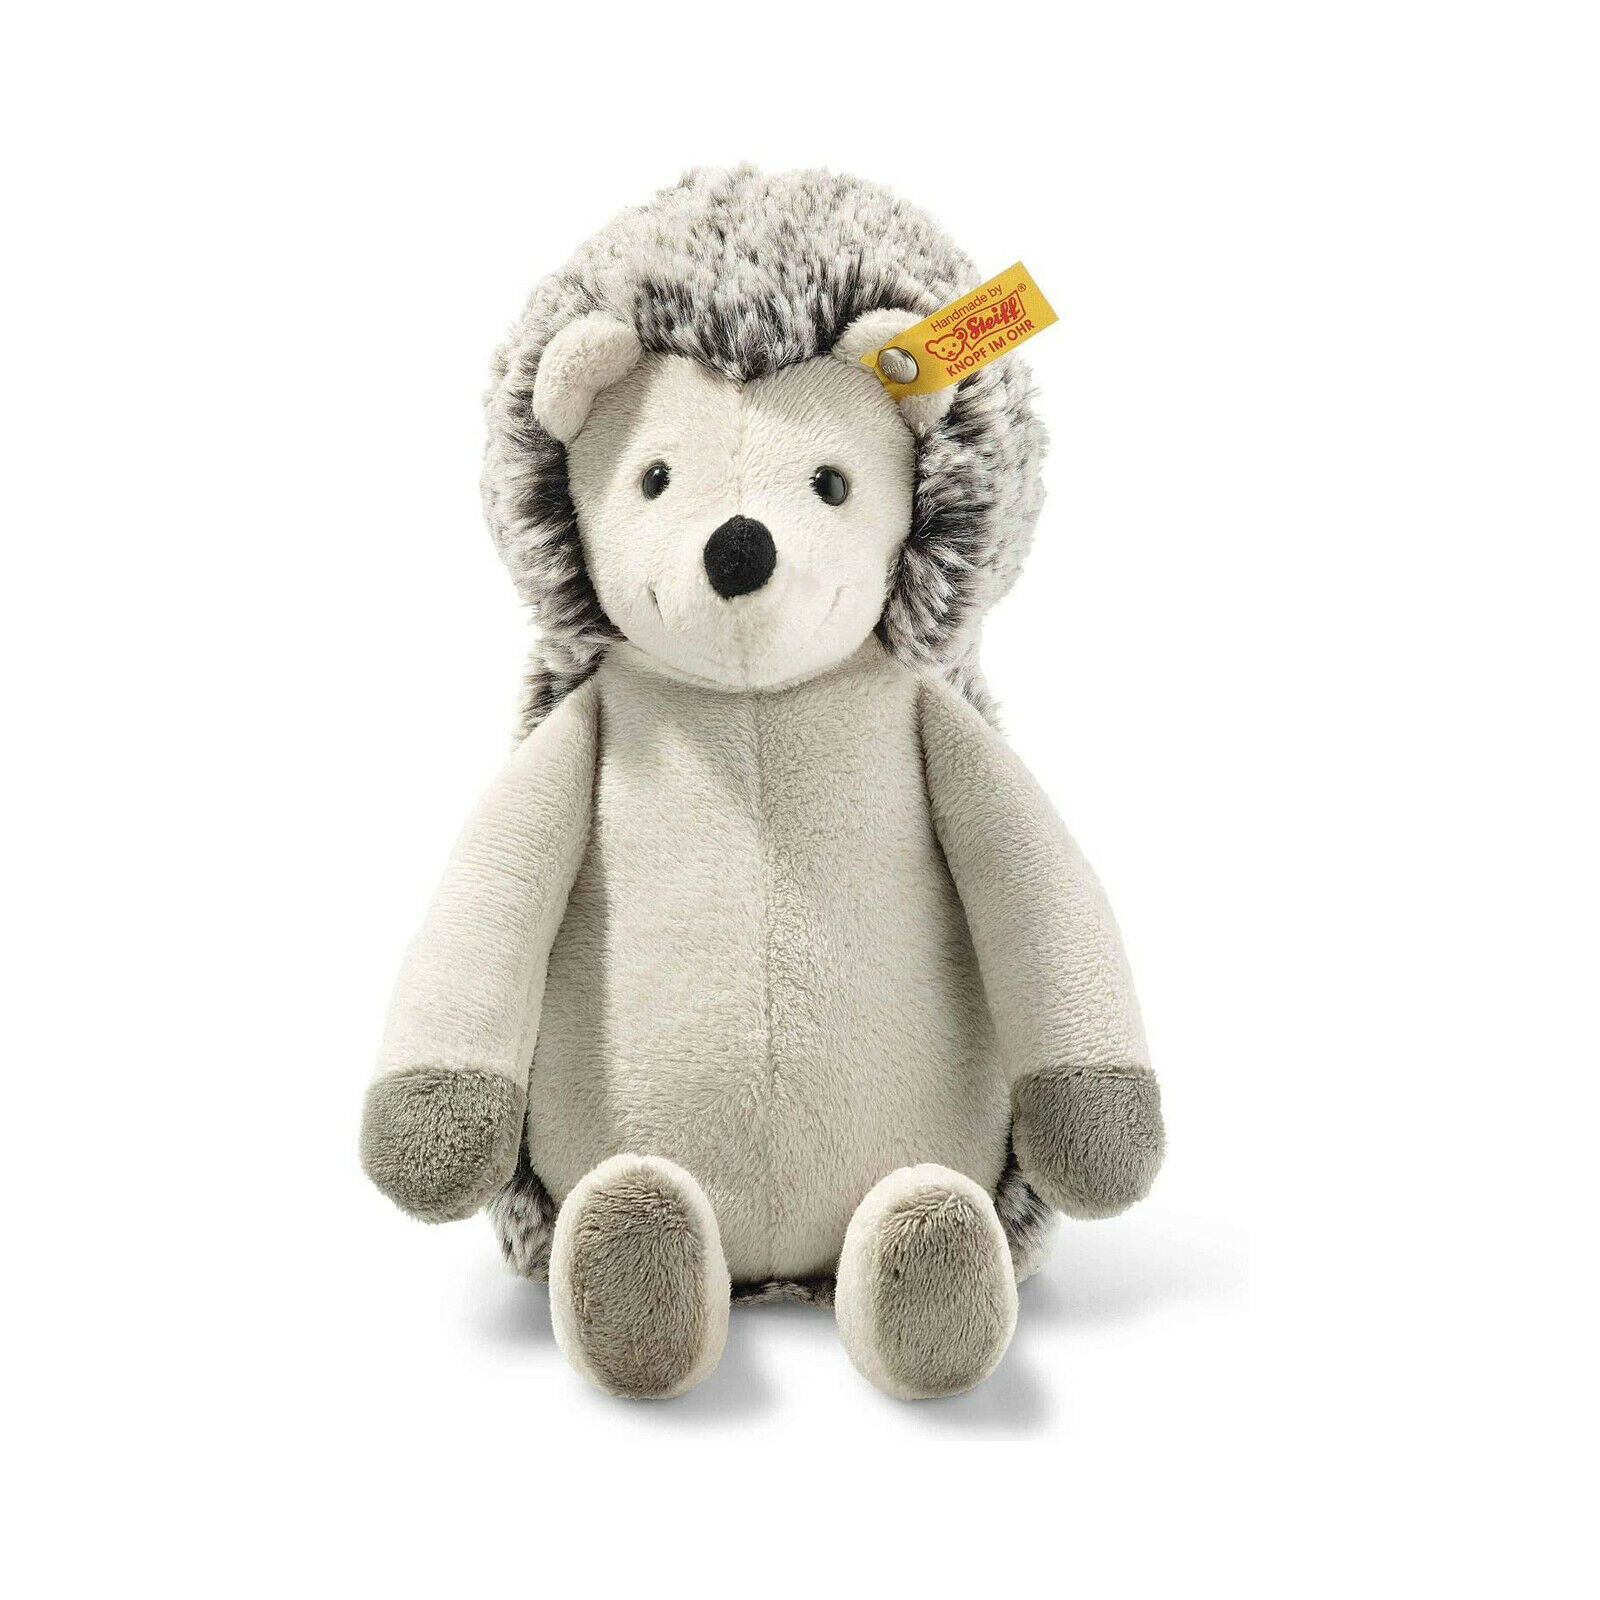 Steiff Hedgy Hedgehog 11 Inch Plush Figure NEW IN STOCK